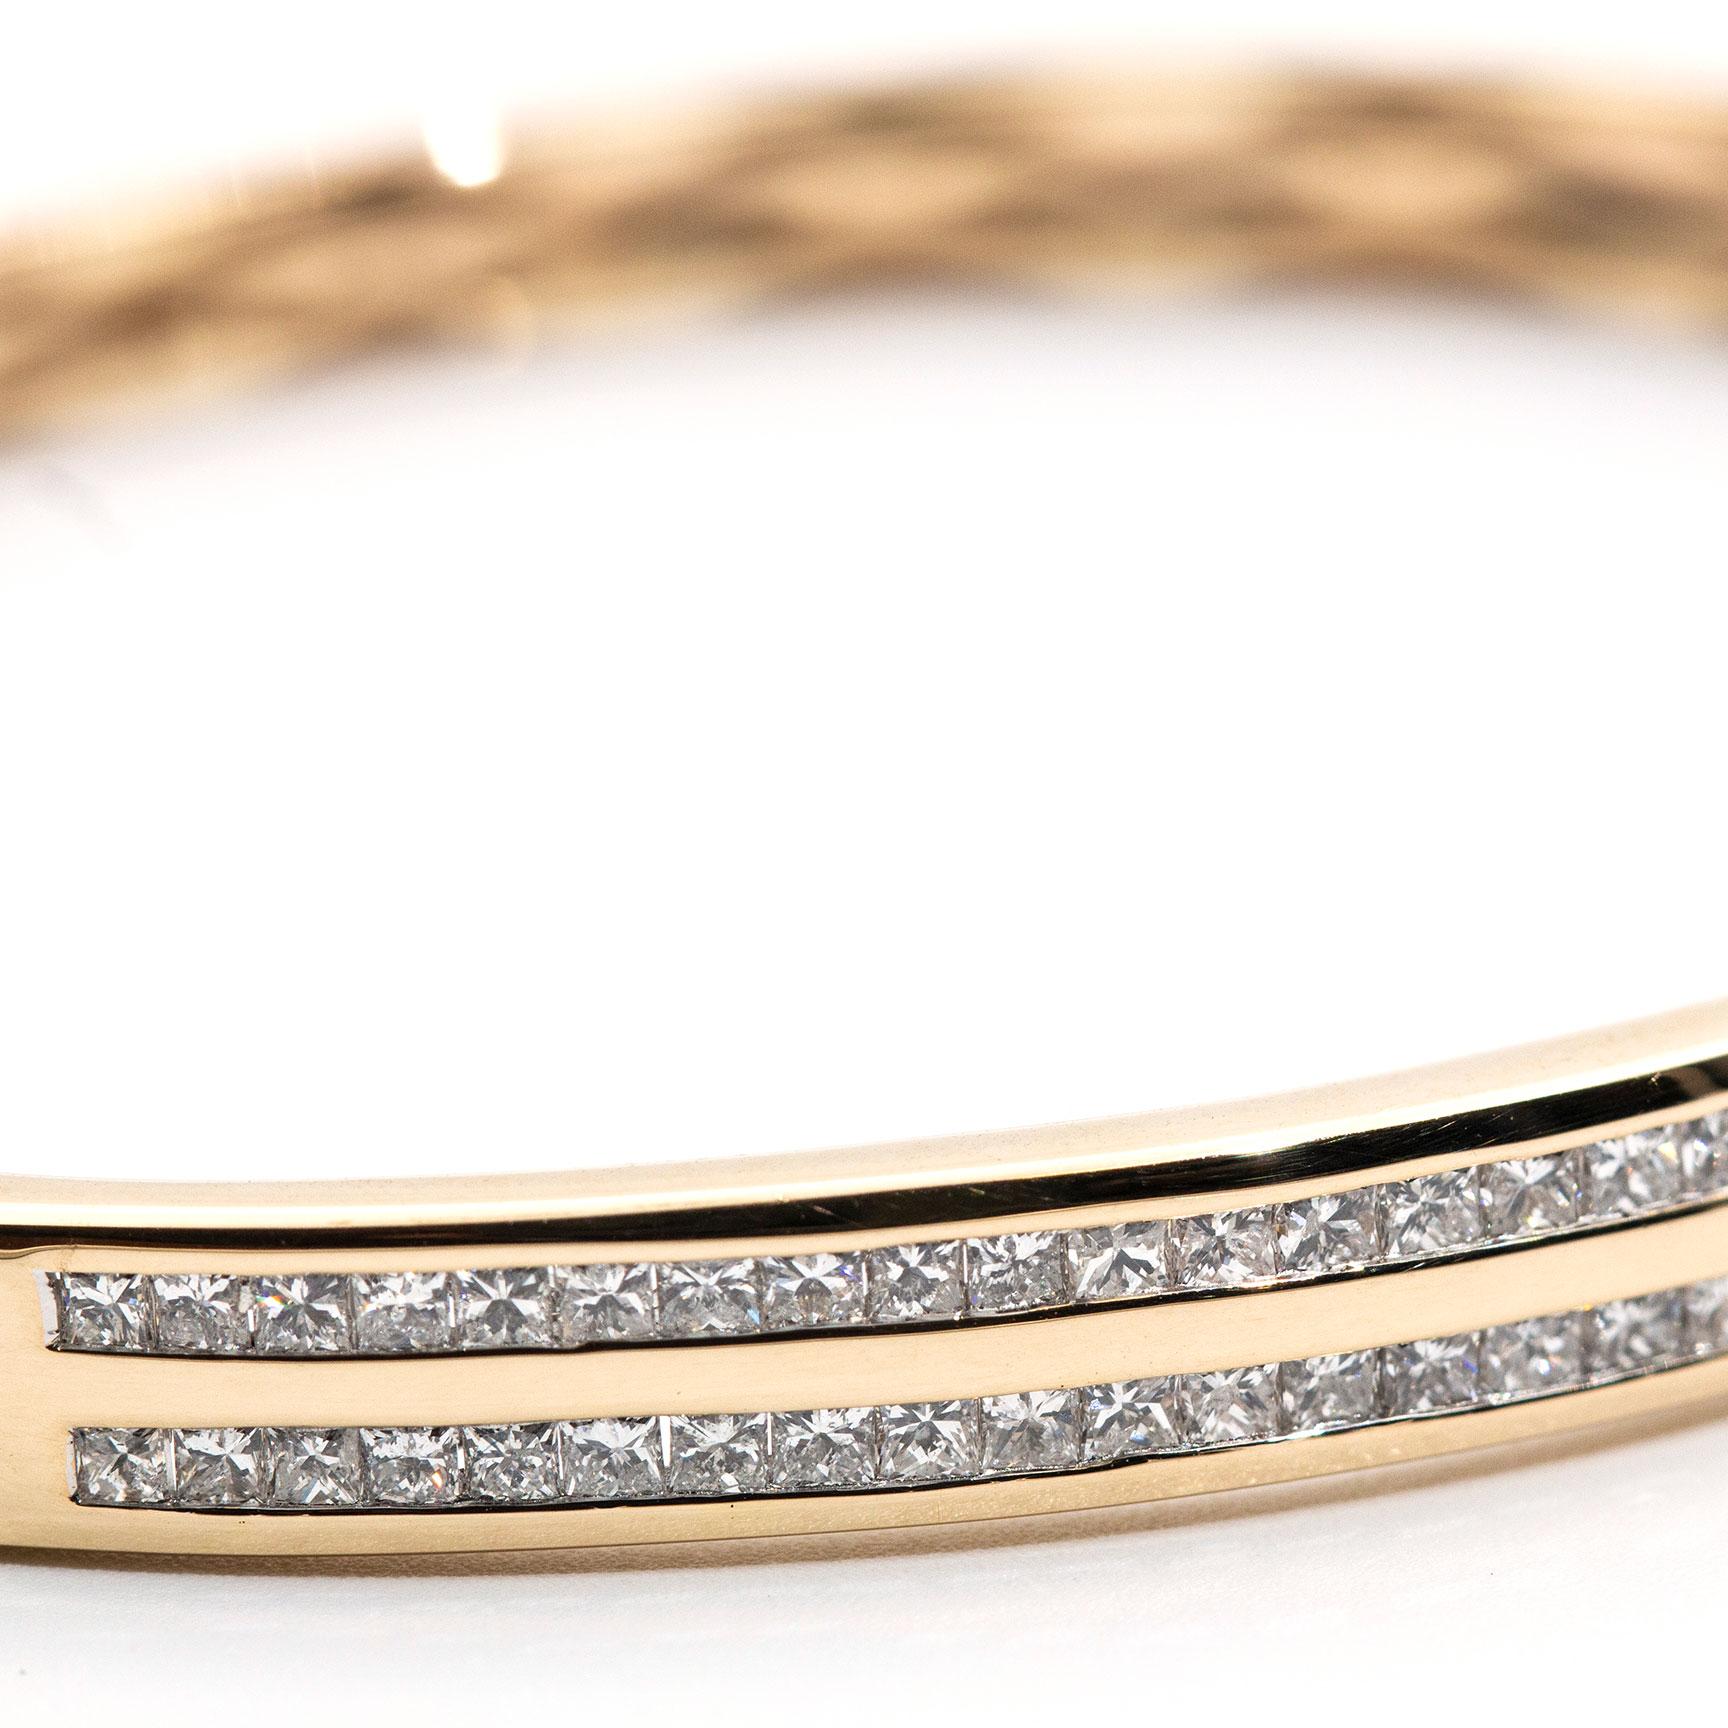 This luxurious vintage oval hinged bangle is forged in 9 carat yellow gold and features two stunning rows of princess cut diamonds totalling 1.24 carat.  We bestowed the name The Lena Bangle to this vintage beauty.  The Lena Bangle is oval in shape